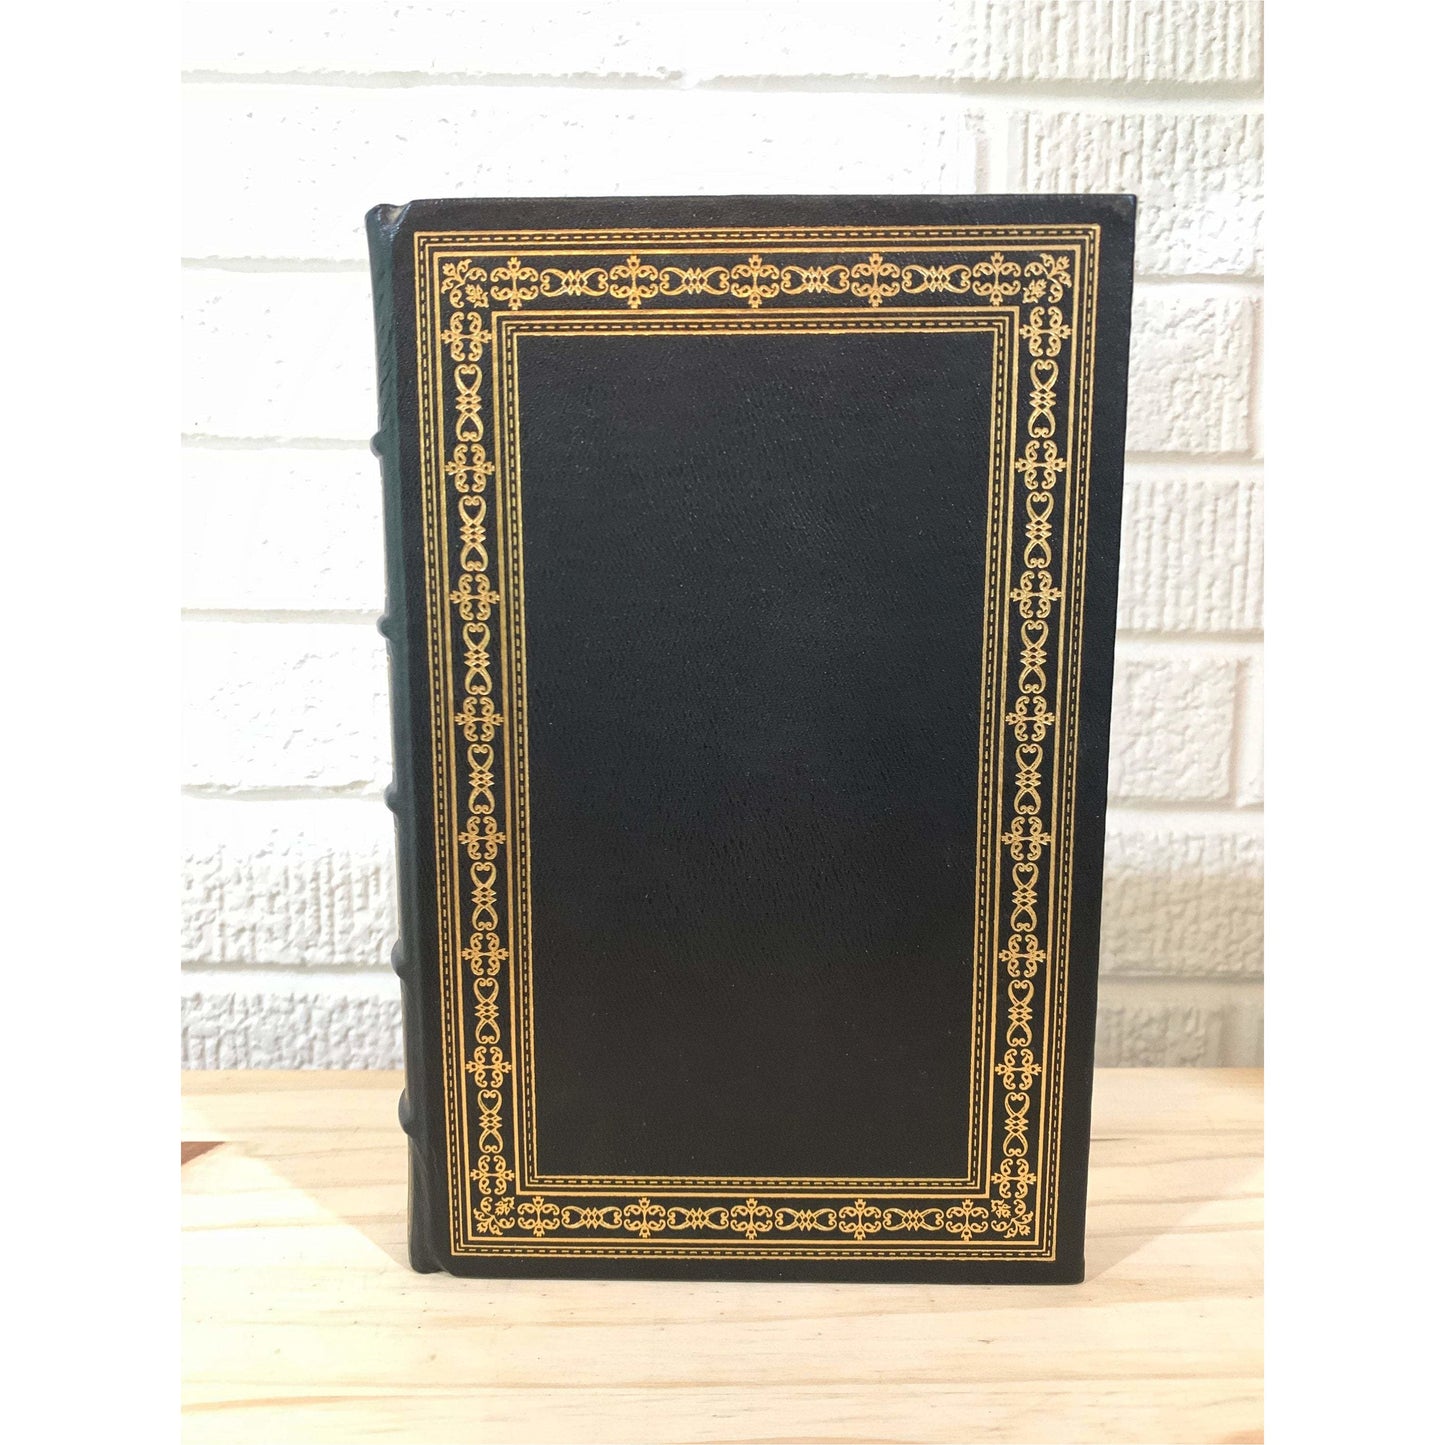 The Red and the Black, Stendhal, Franklin Library, Ornate Leather Book